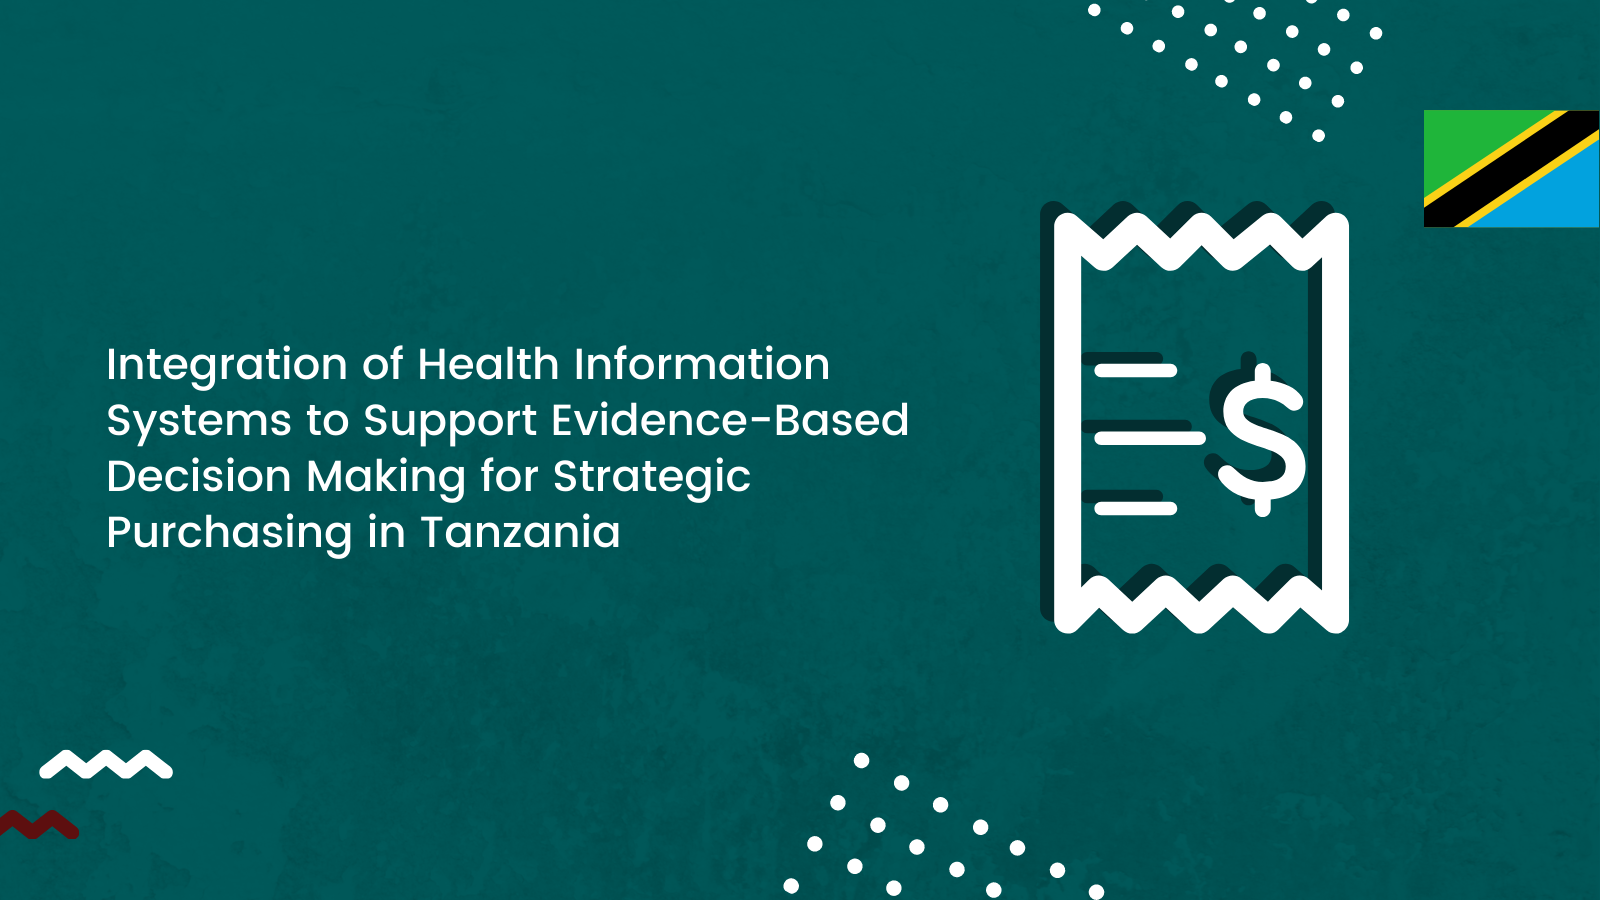 Integration of Health Information Systems to Support Evidence-Based Decision Making for Strategic Purchasing in Tanzania